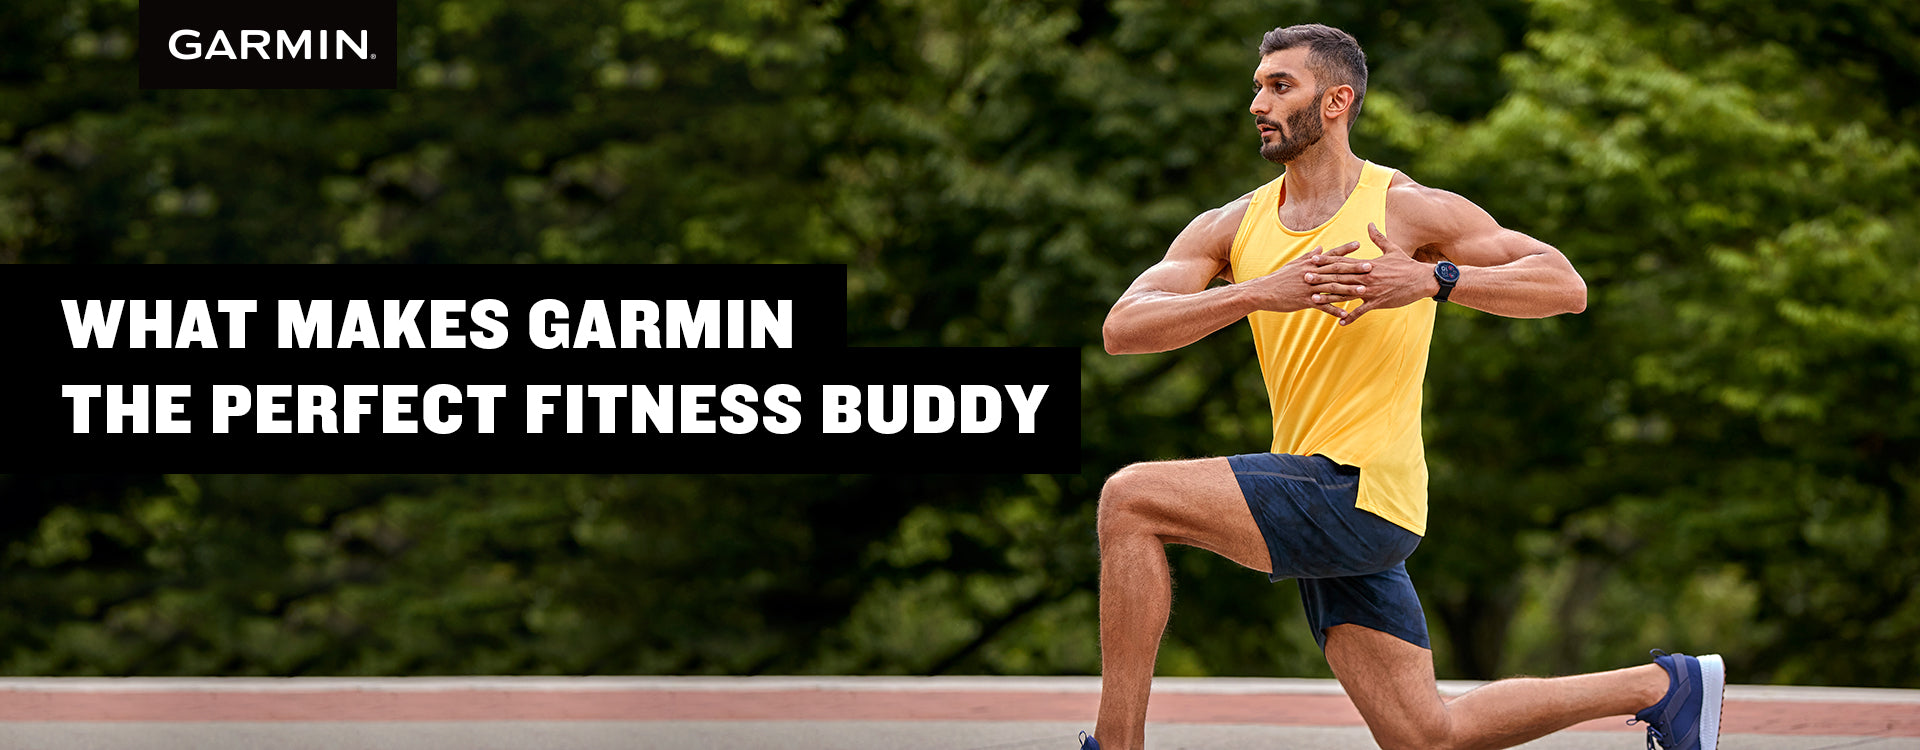 What Makes Garmin the Perfect Fitness Buddy